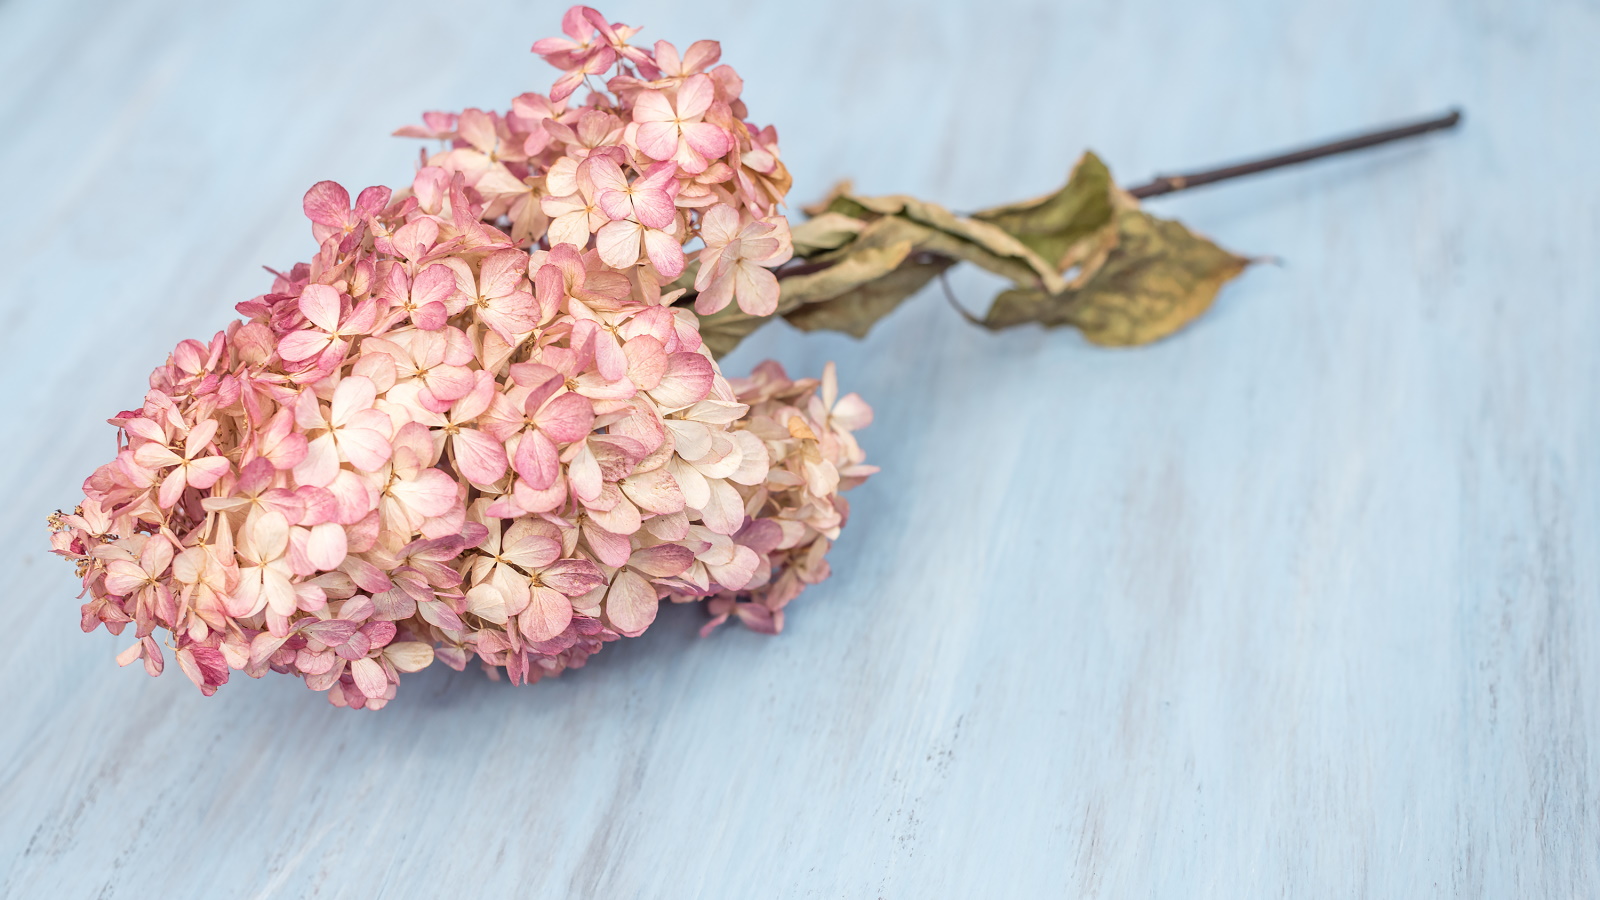 How to Dry Hydrangeas to Use in Floral Centerpieces and Arrangements